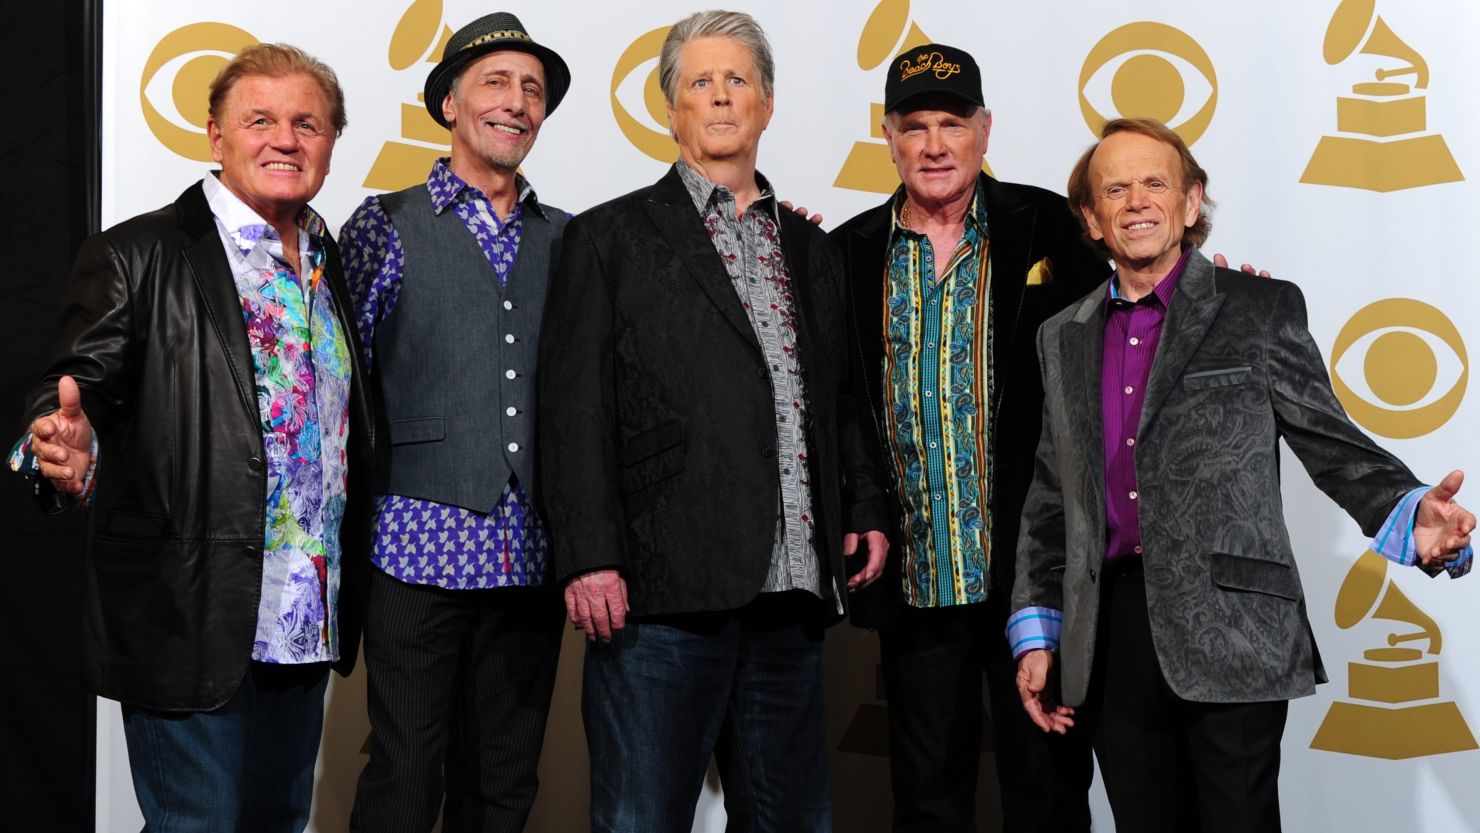 The Beach Boys, shown here at the 54th Grammy Awards in February.